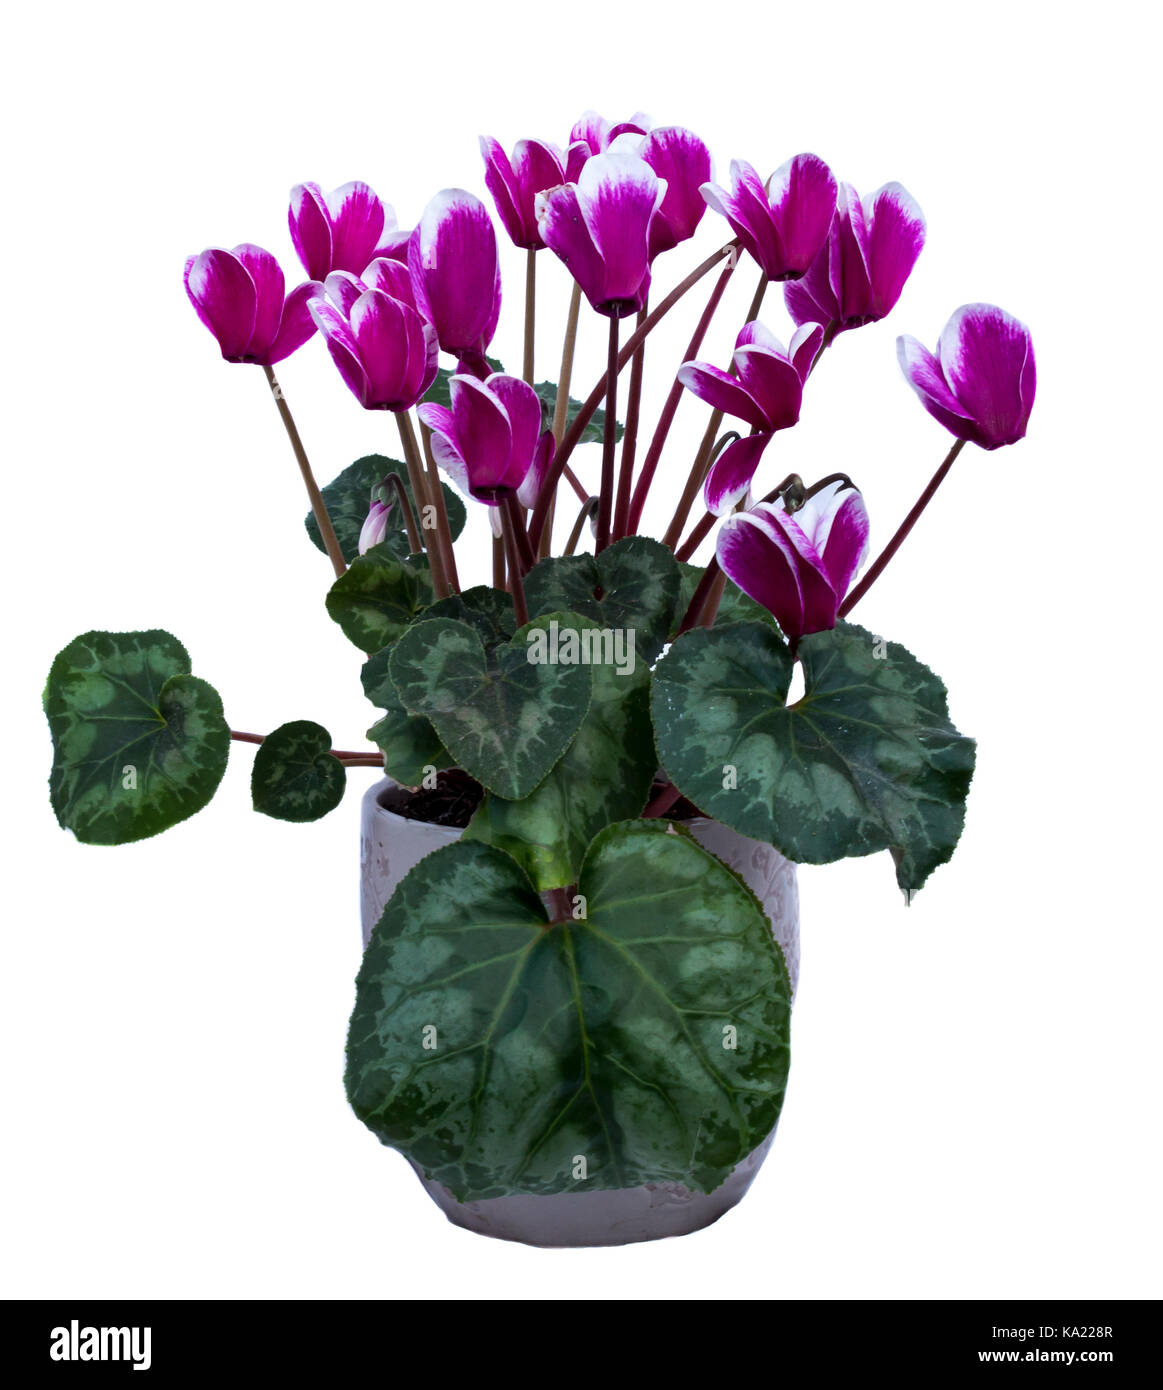 Pink and white cyclamen plant with many flower blossoms isolated on white background Stock Photo